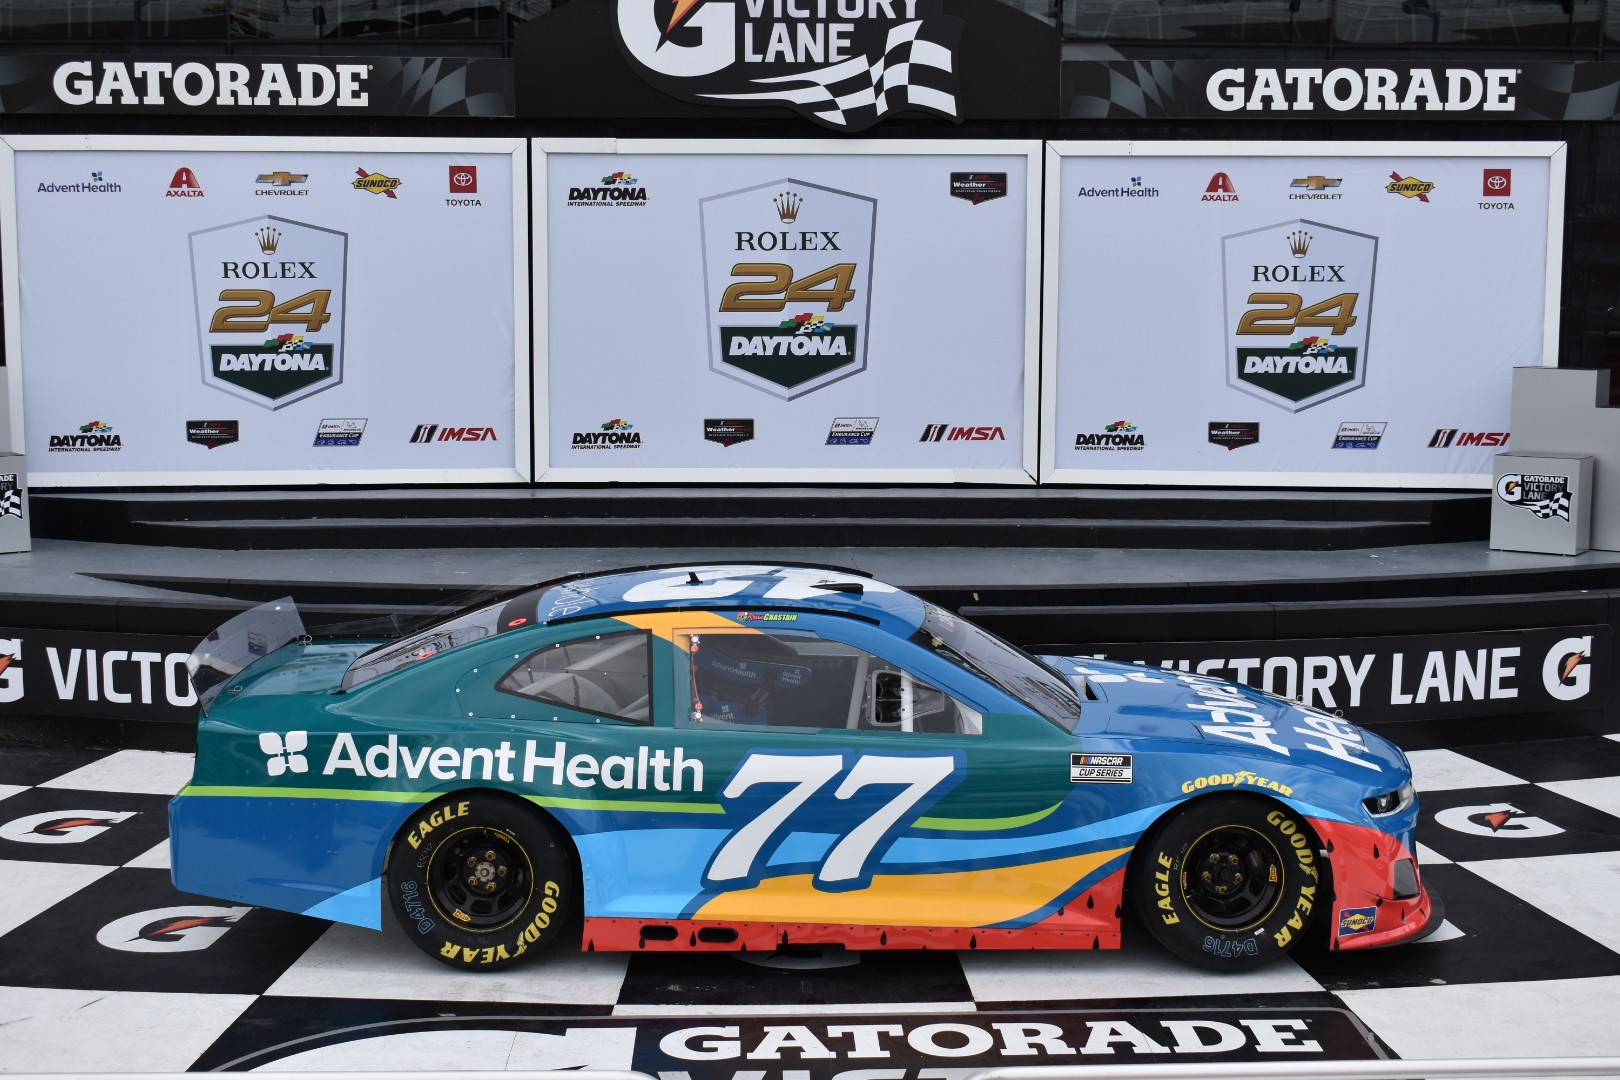 During the 2020 season, Ross Chastain will drive the No. 77 AdventHealth Chevrolet Camaro ZL1 1LE, prepared by CGR, for starts at the DAYTONA 500 in Florida and the Coca-Cola 600 at Charlotte Motor Speedway in North Carolina.